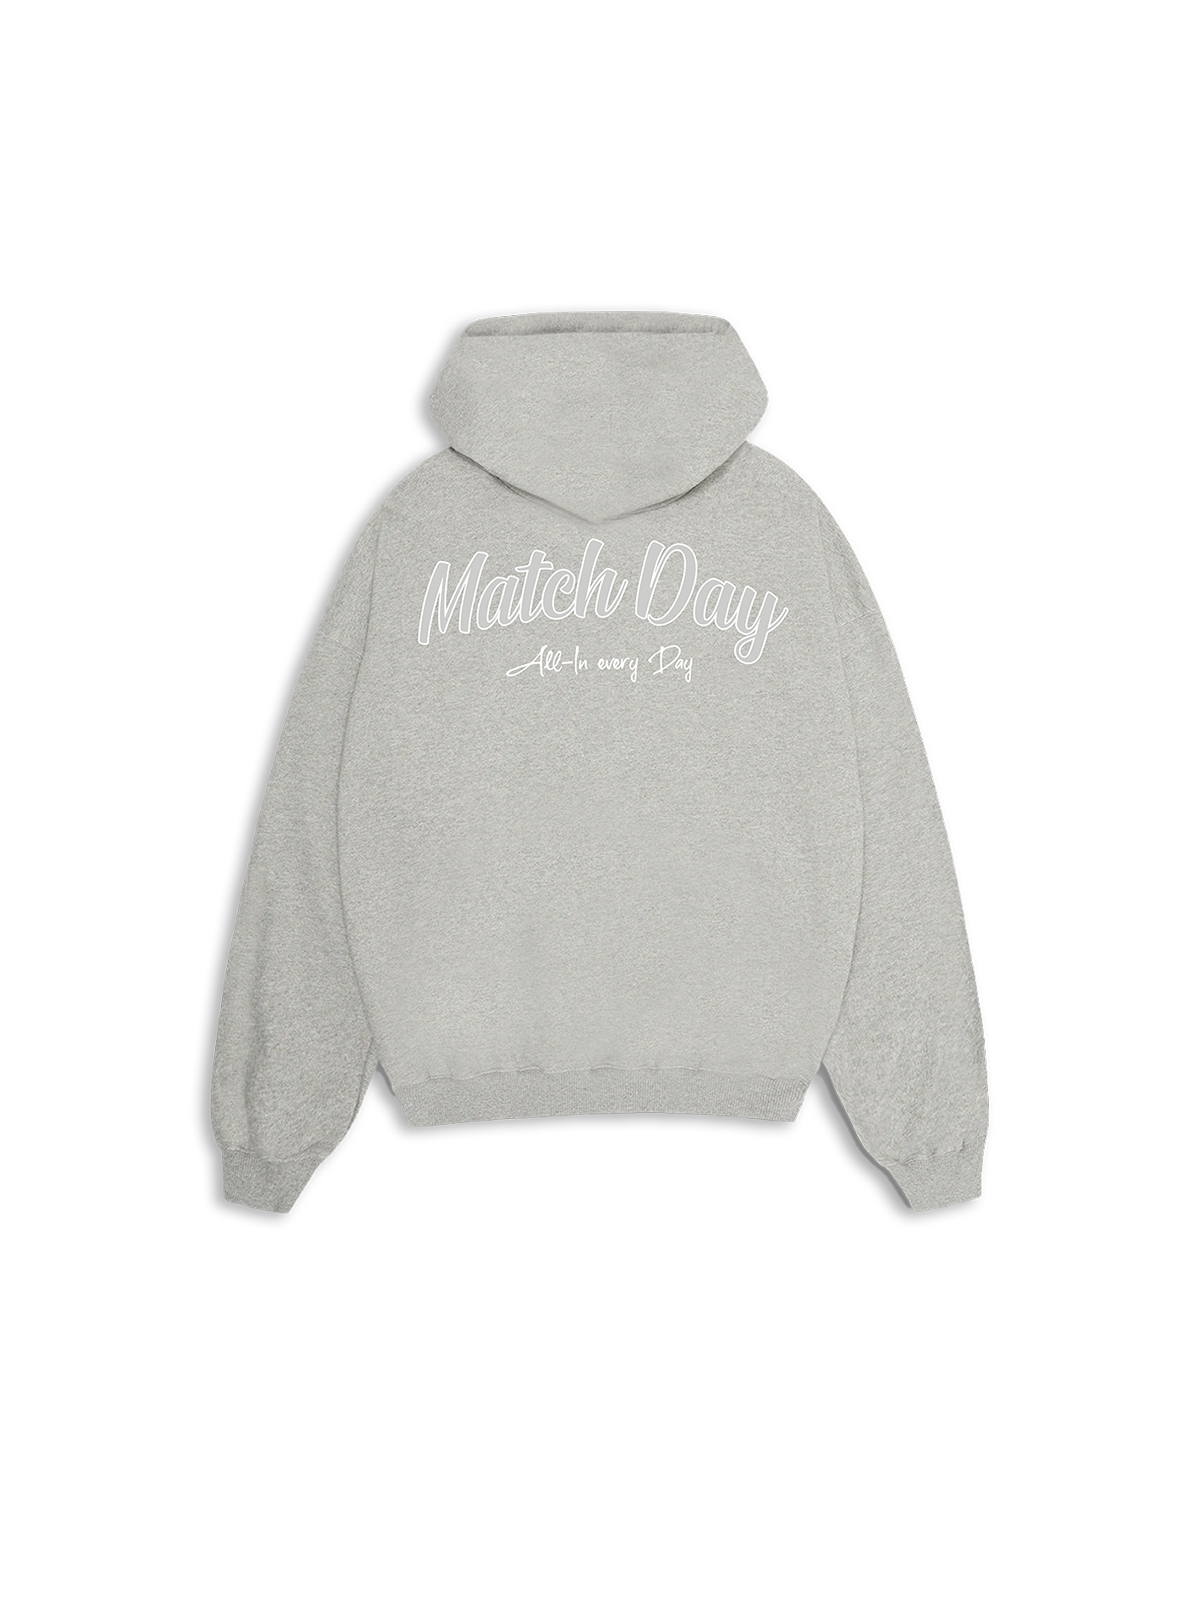 MatchDay Hoodie Grey